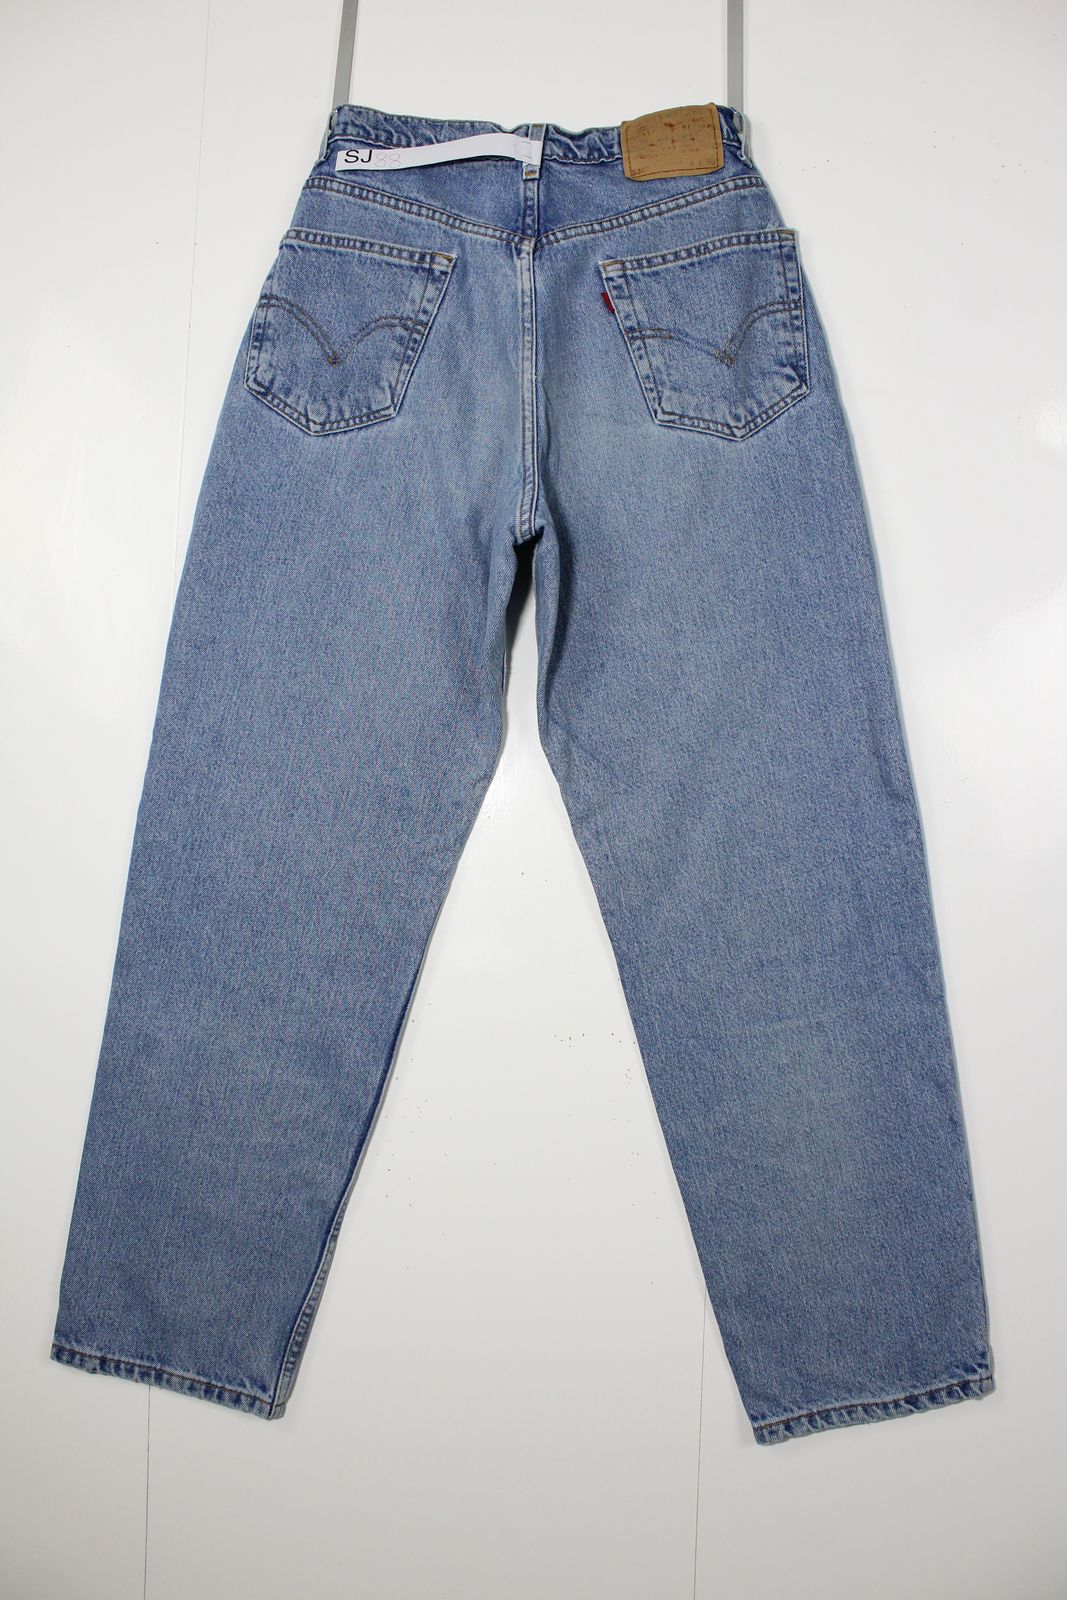 Levi's 550 Made In USA W34 L30 Jeans Vintage